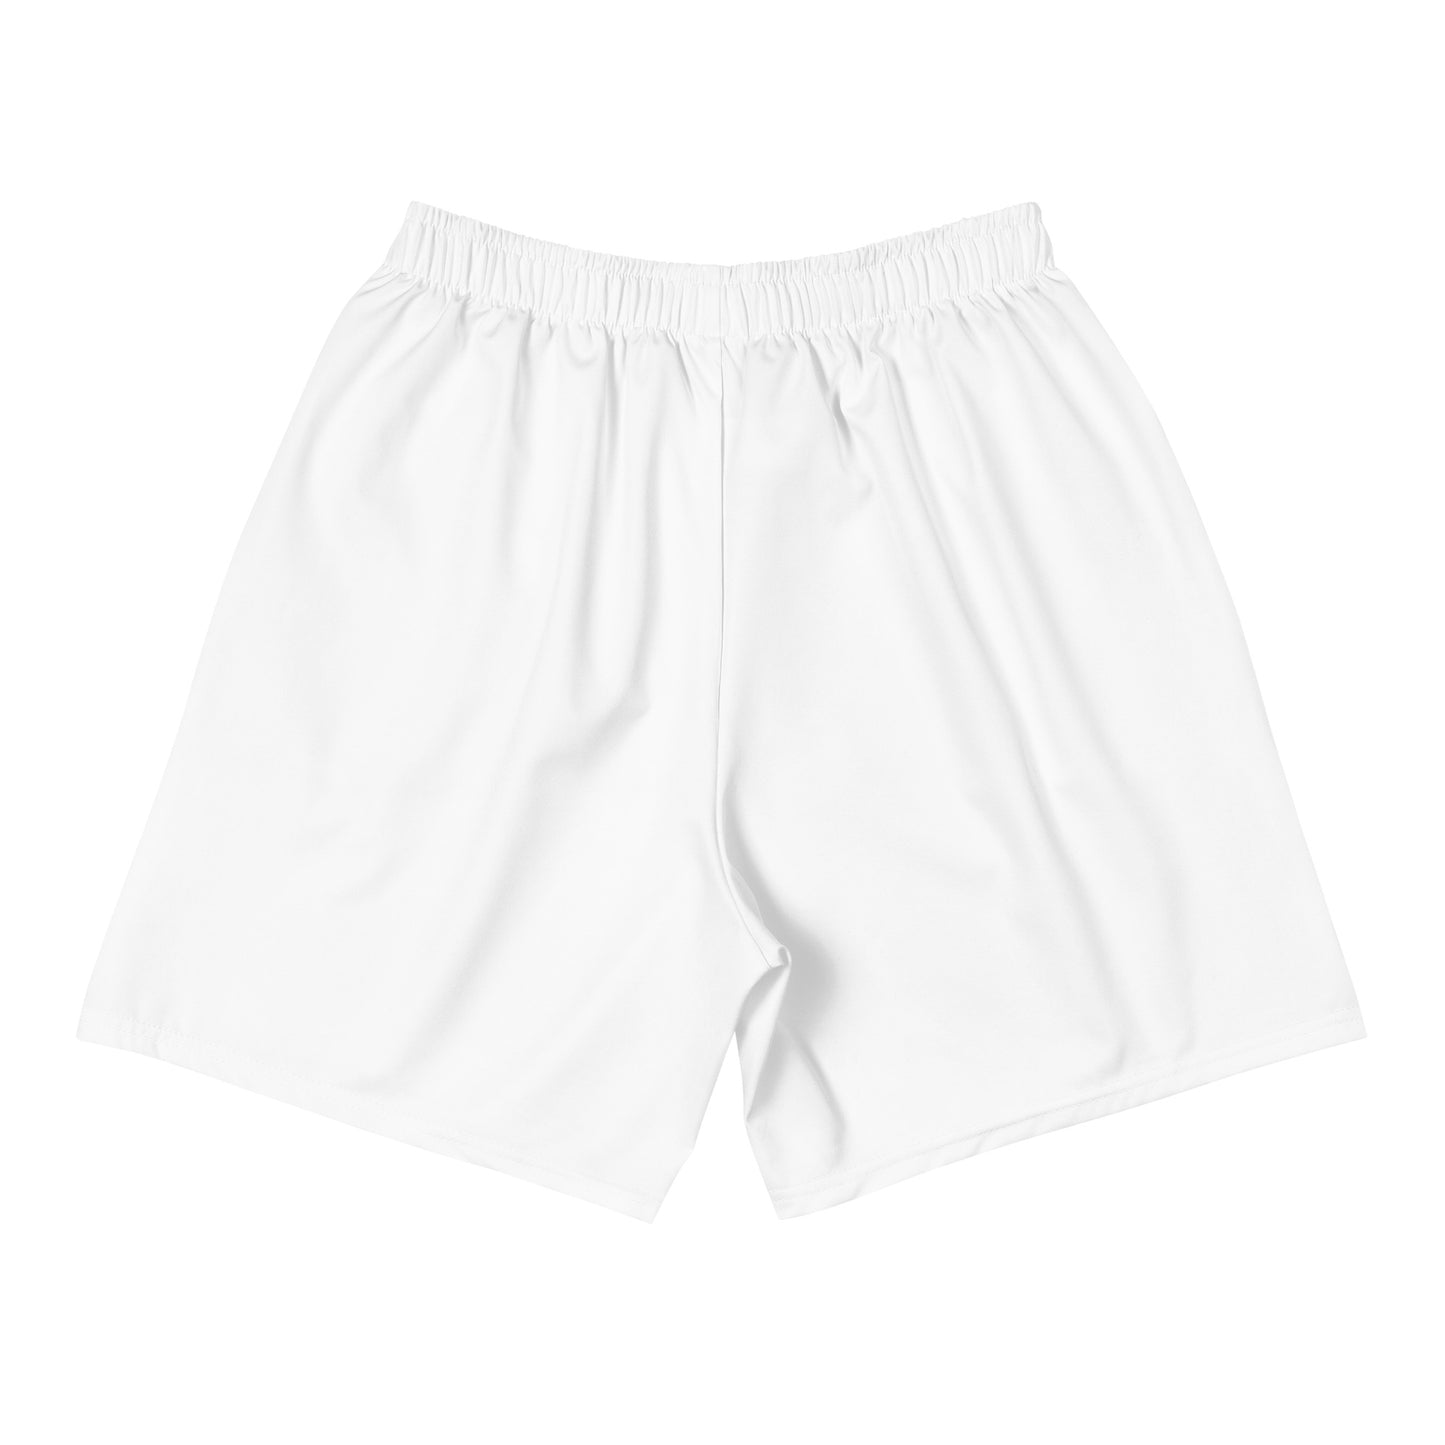 Wht/Red Hip Suffer Athletic Shorts